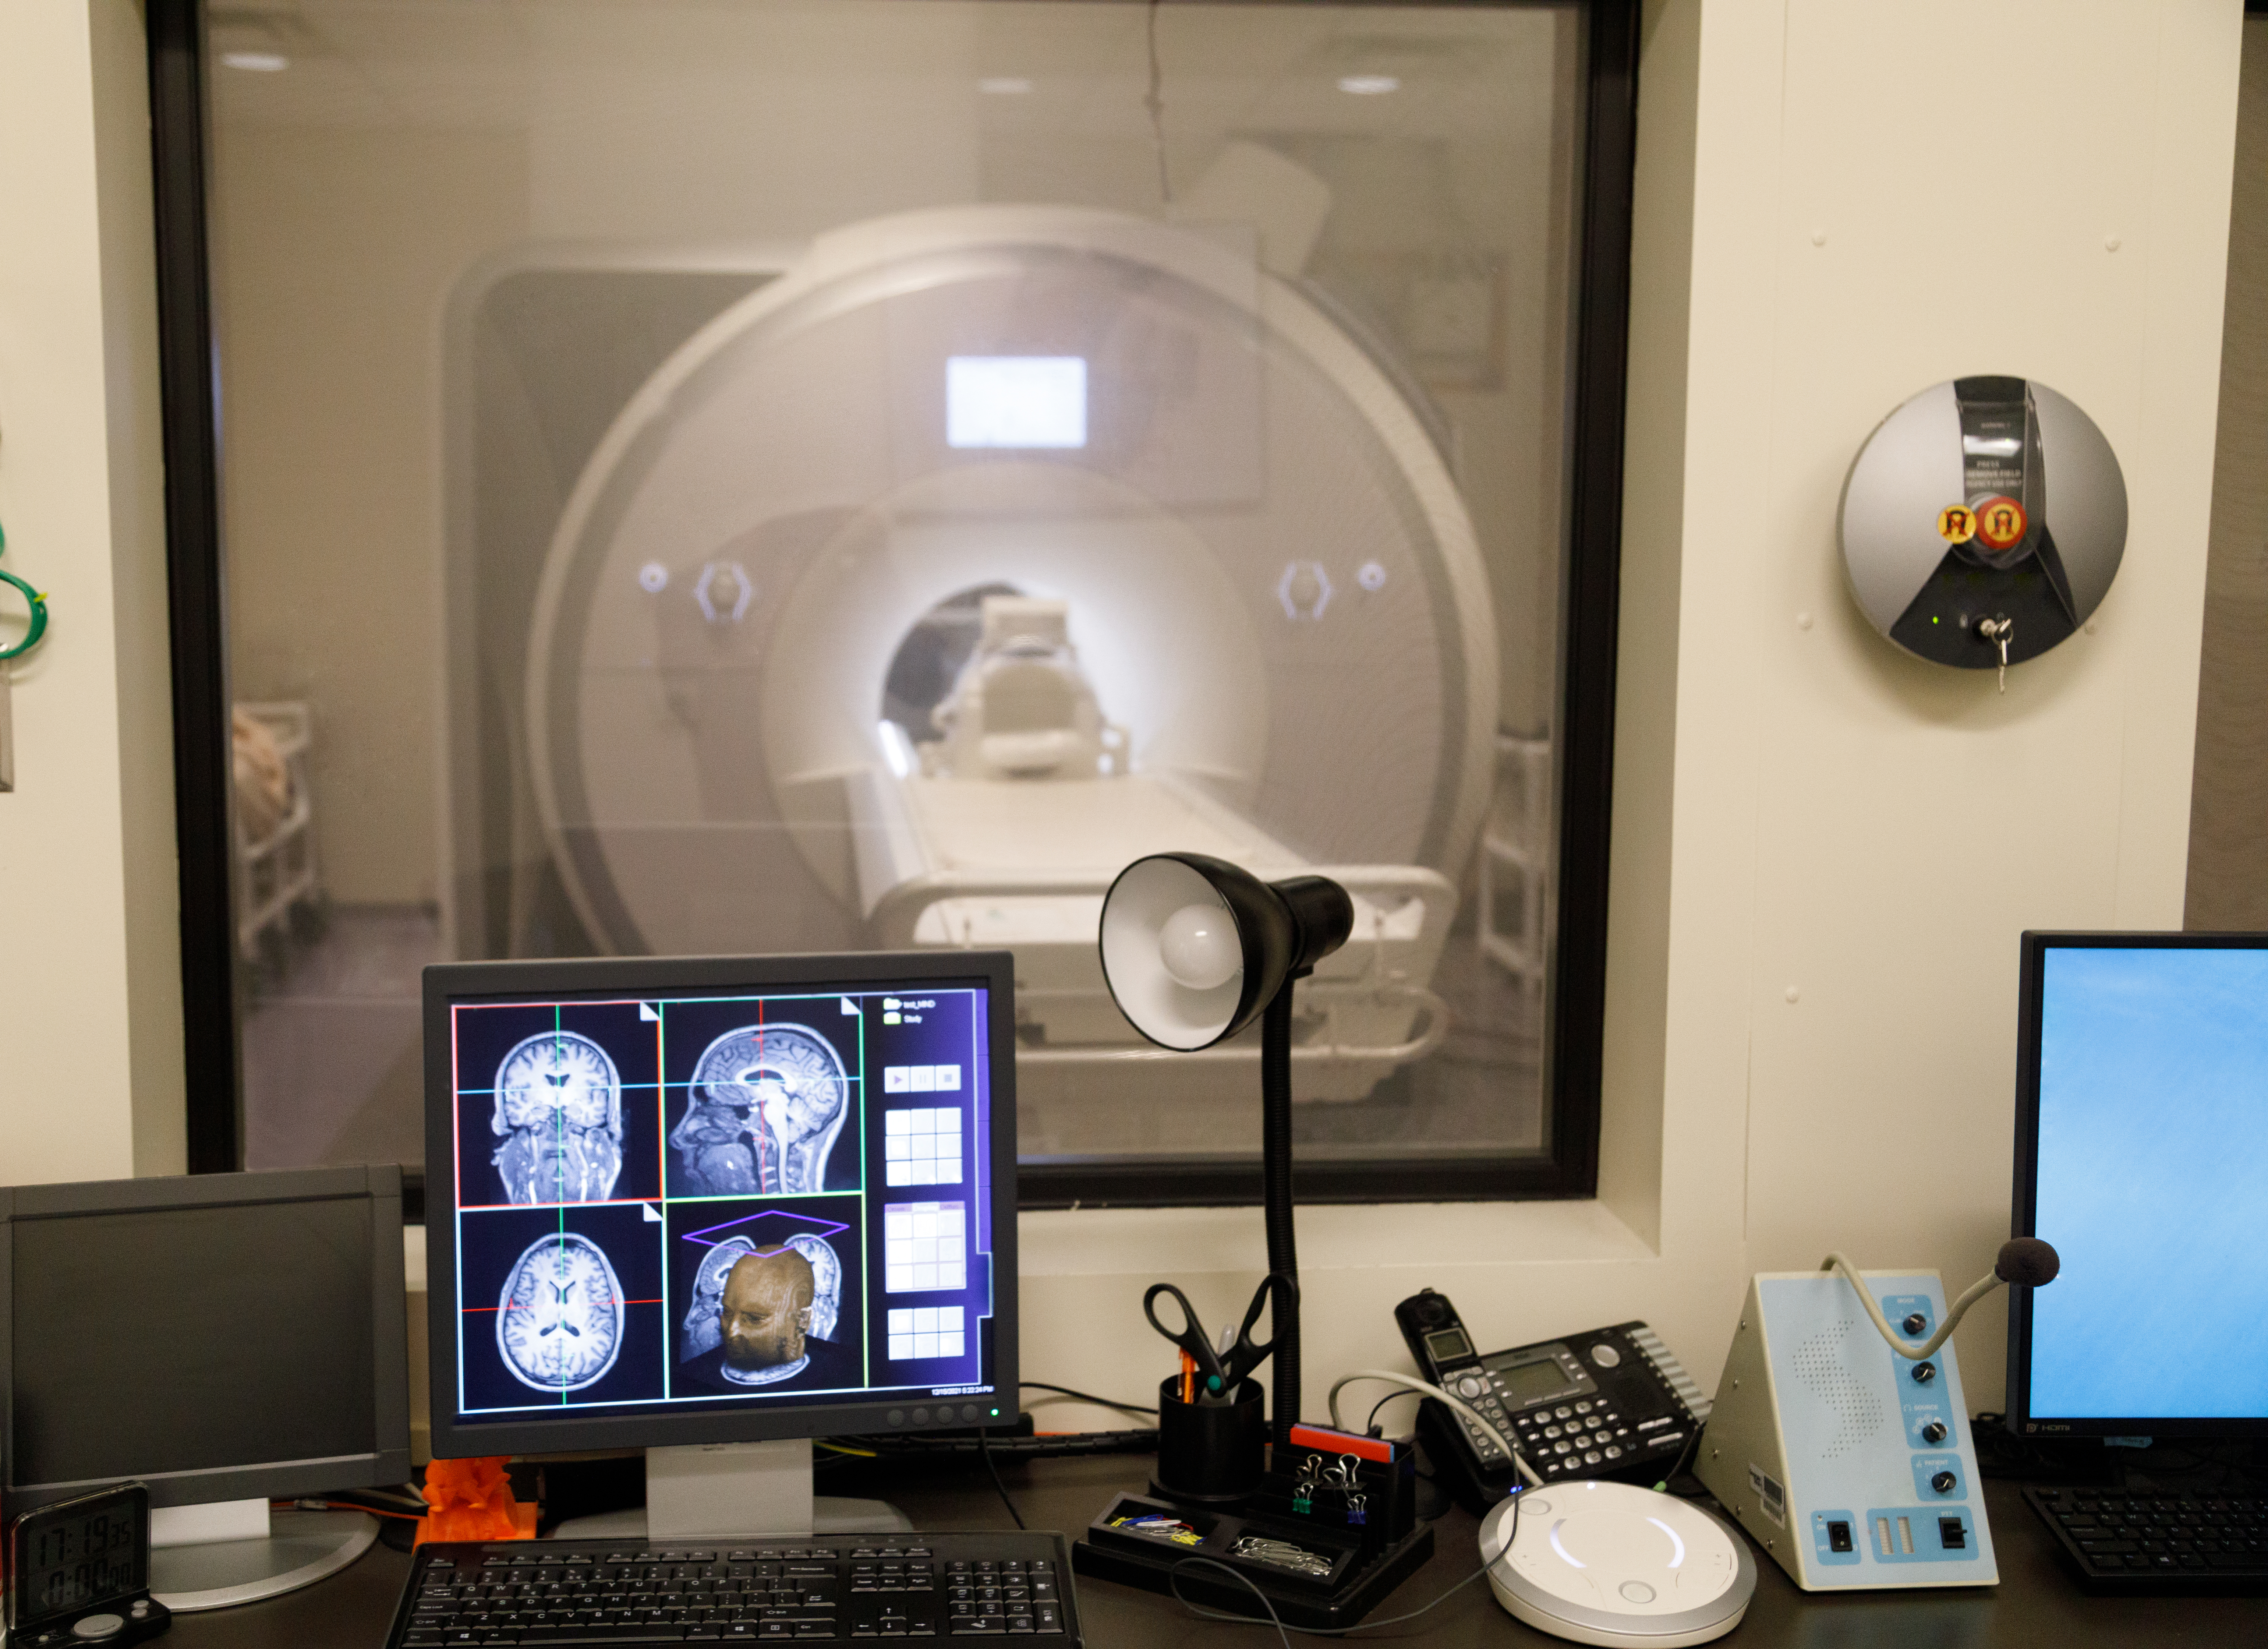 An image s،wing an FMRI ma،e with computer screens s،wing ،in images. Credit: iStock/patrickheagney.